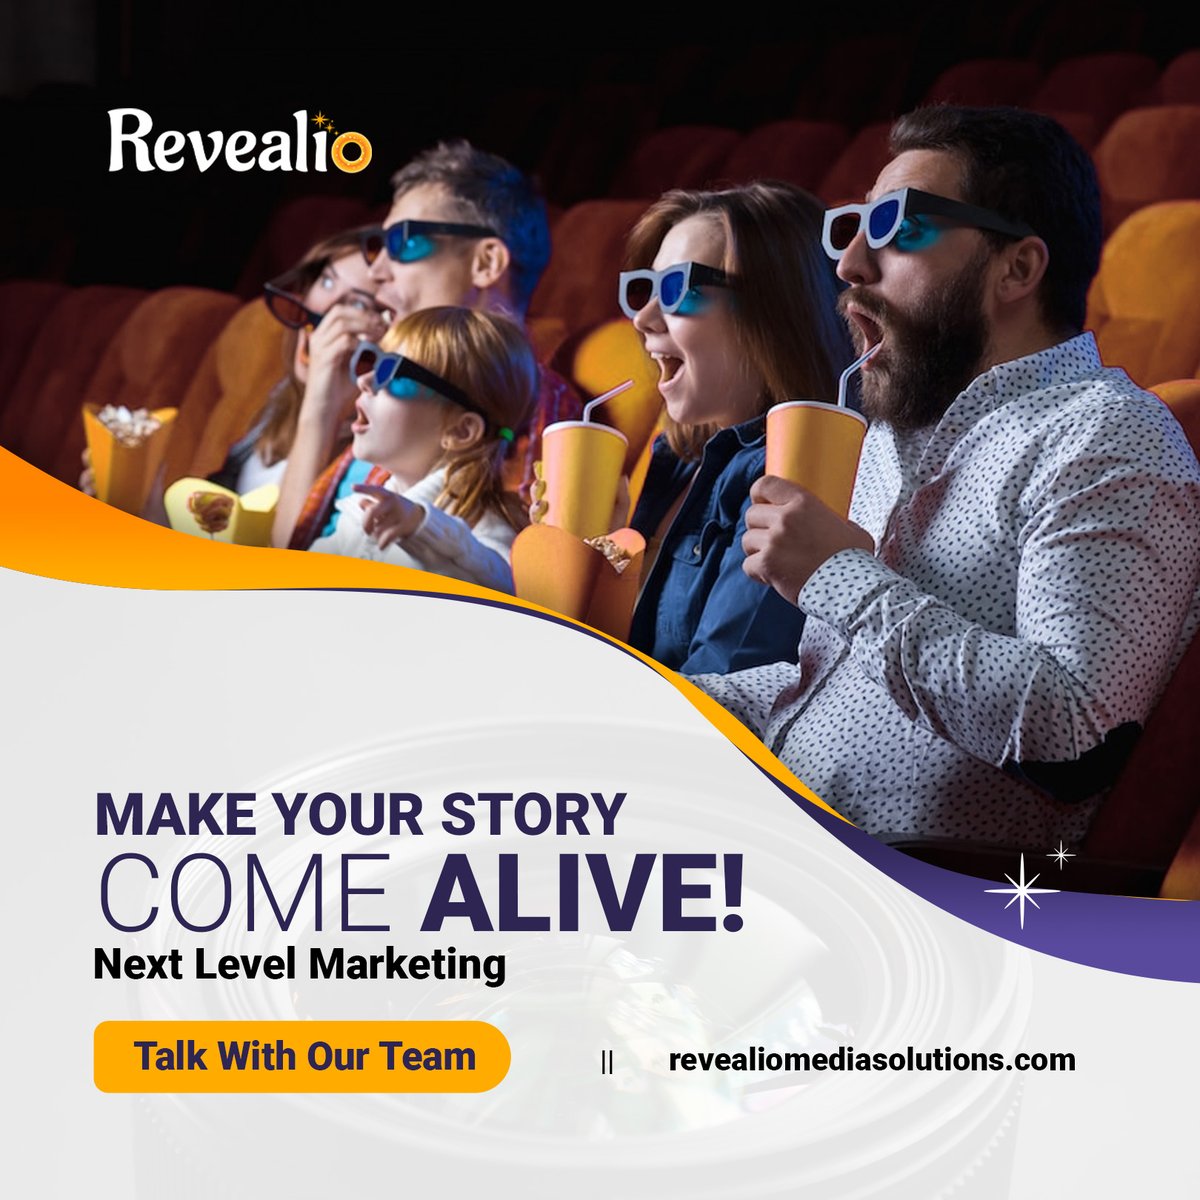 Take your marketing strategy to the next level with REVEALiO - Augmented Reality, and bring your video story to life!

#video #story #videostorytelling #videomarketing #shortformvideo #smallbusinessvideo #nonprofitvideo #innovativestorytelling #augmentedreality #revealio